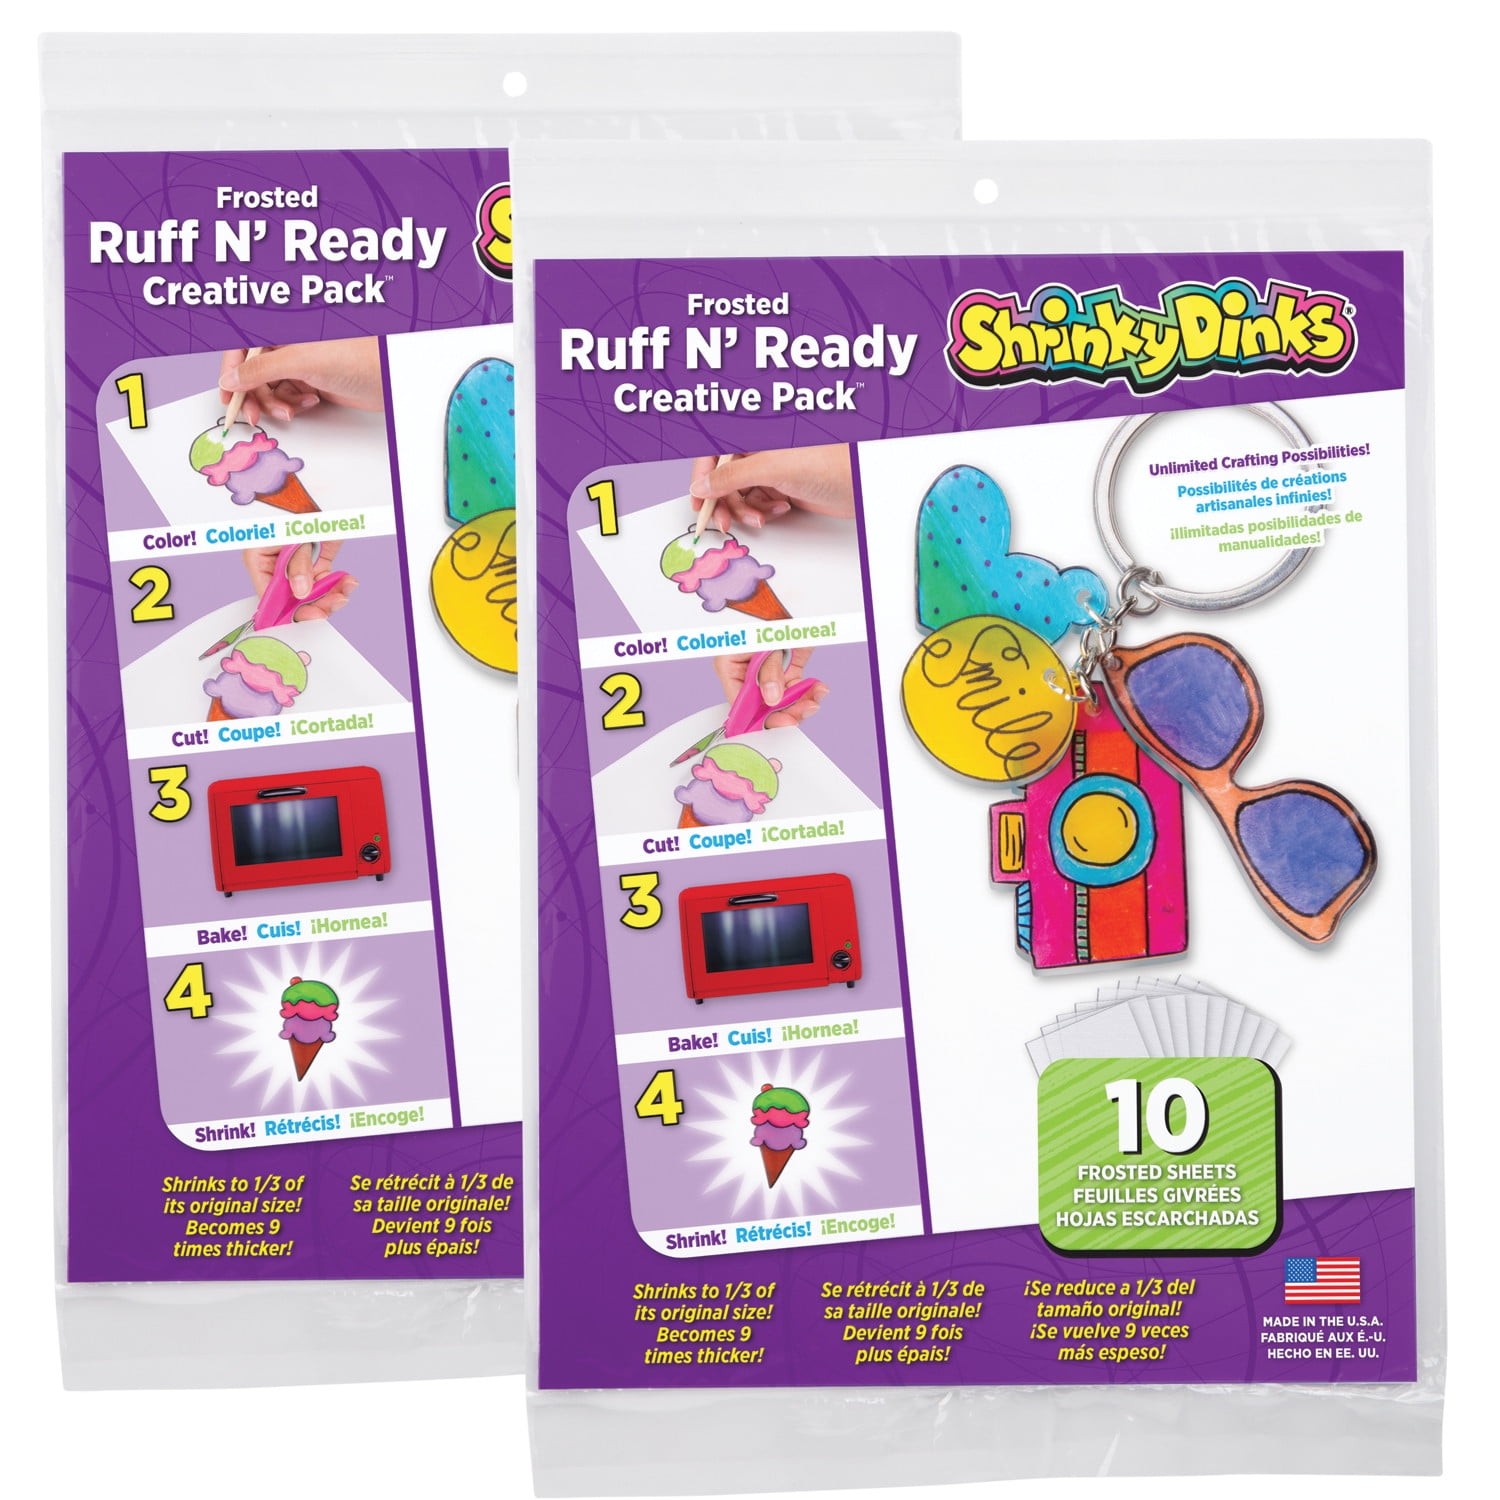 shrinky-dinks-creative-pack-20-sheets-frosted-ruff-n-ready-walmart